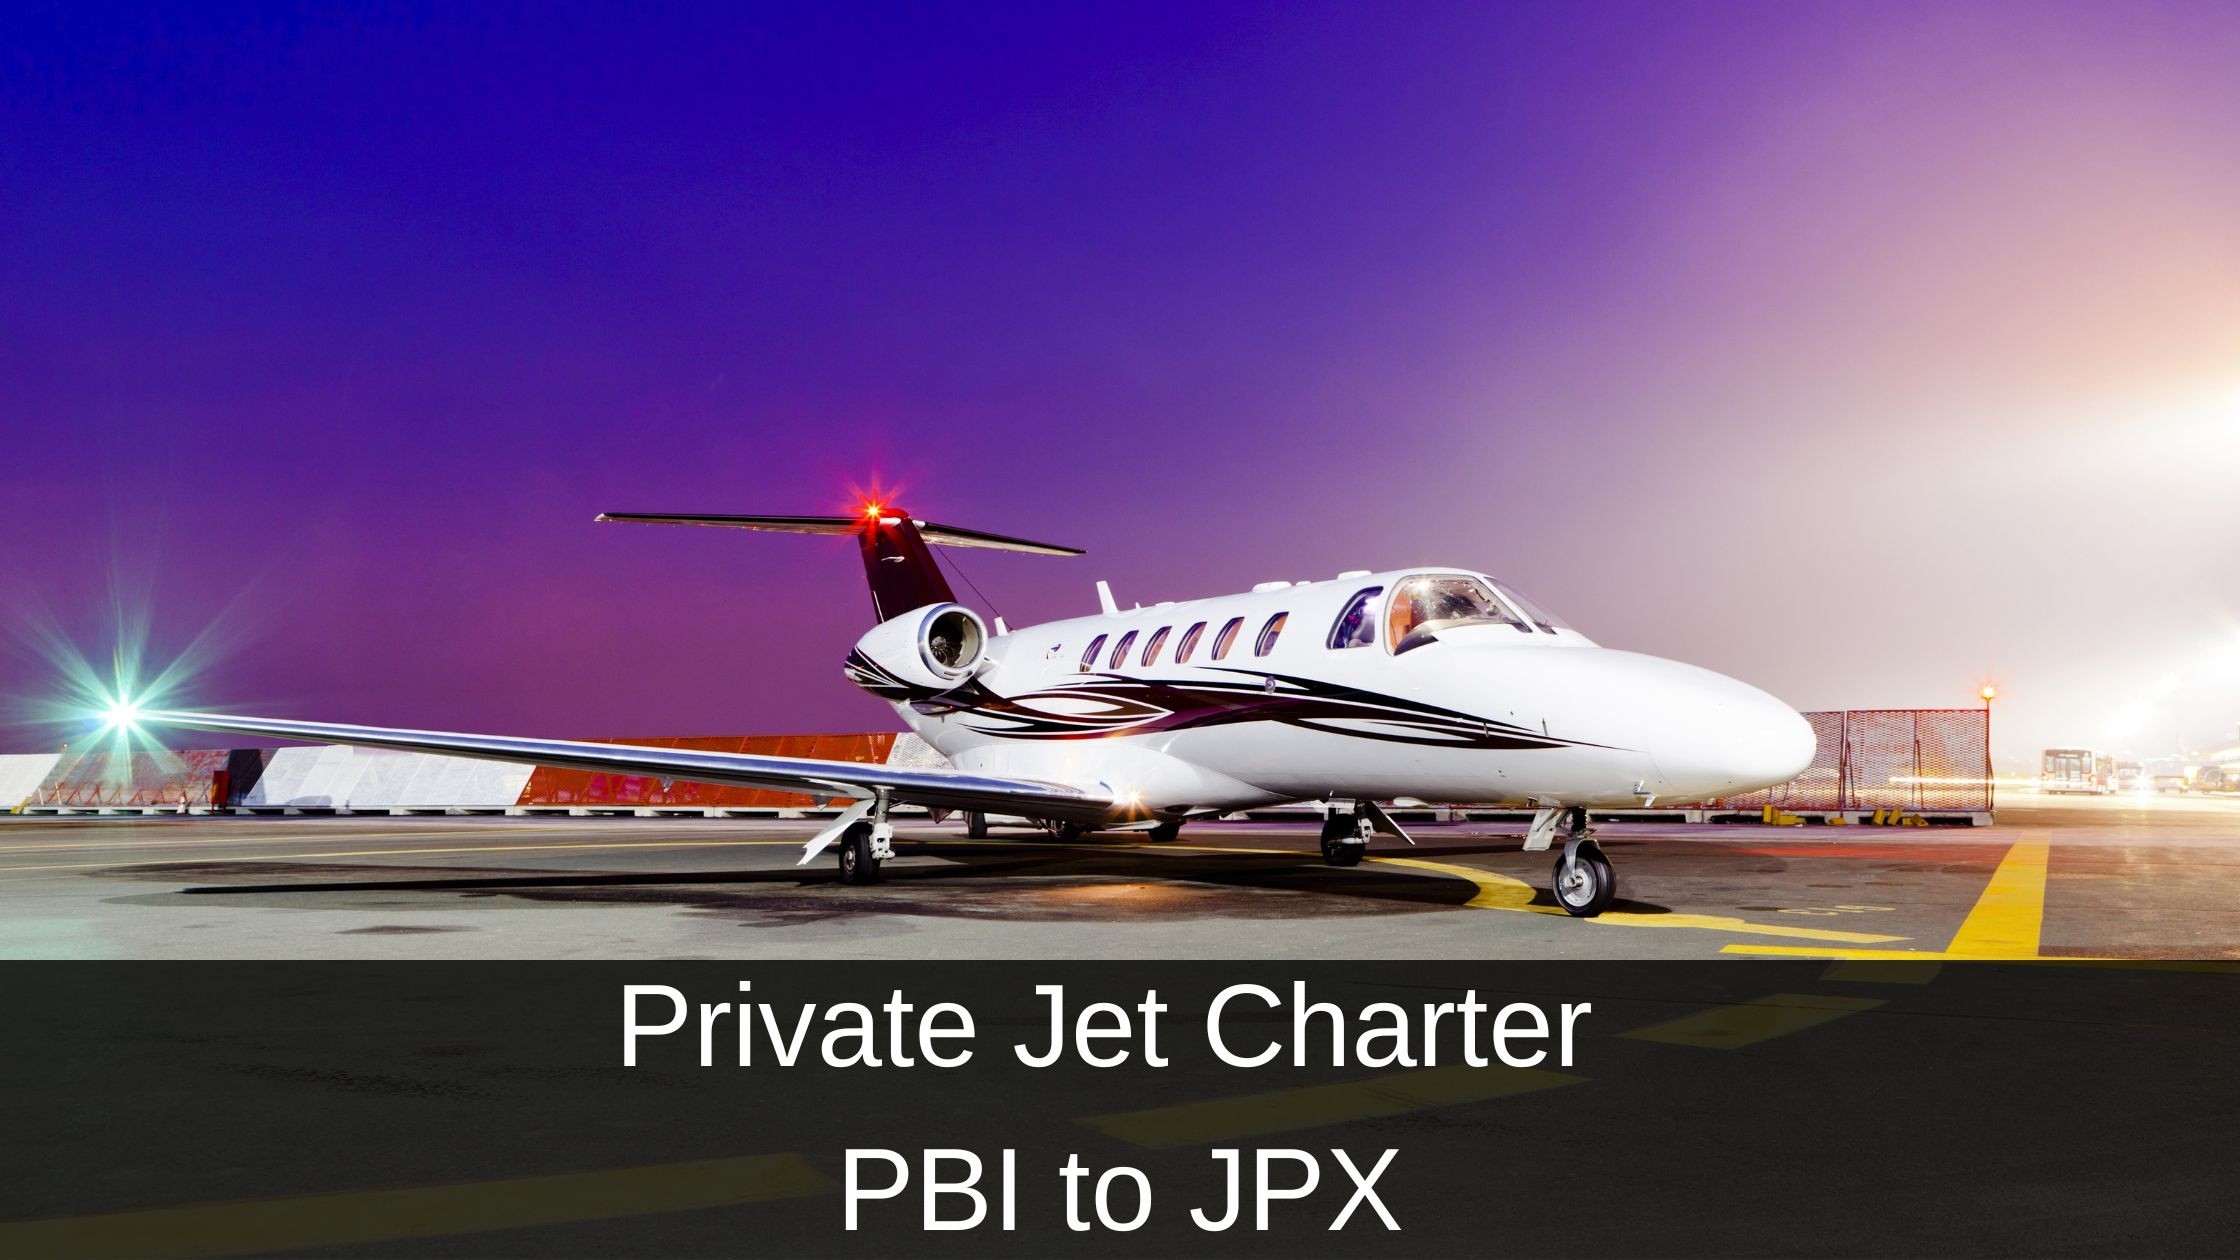 Private Jet Charter from PBI to JPX